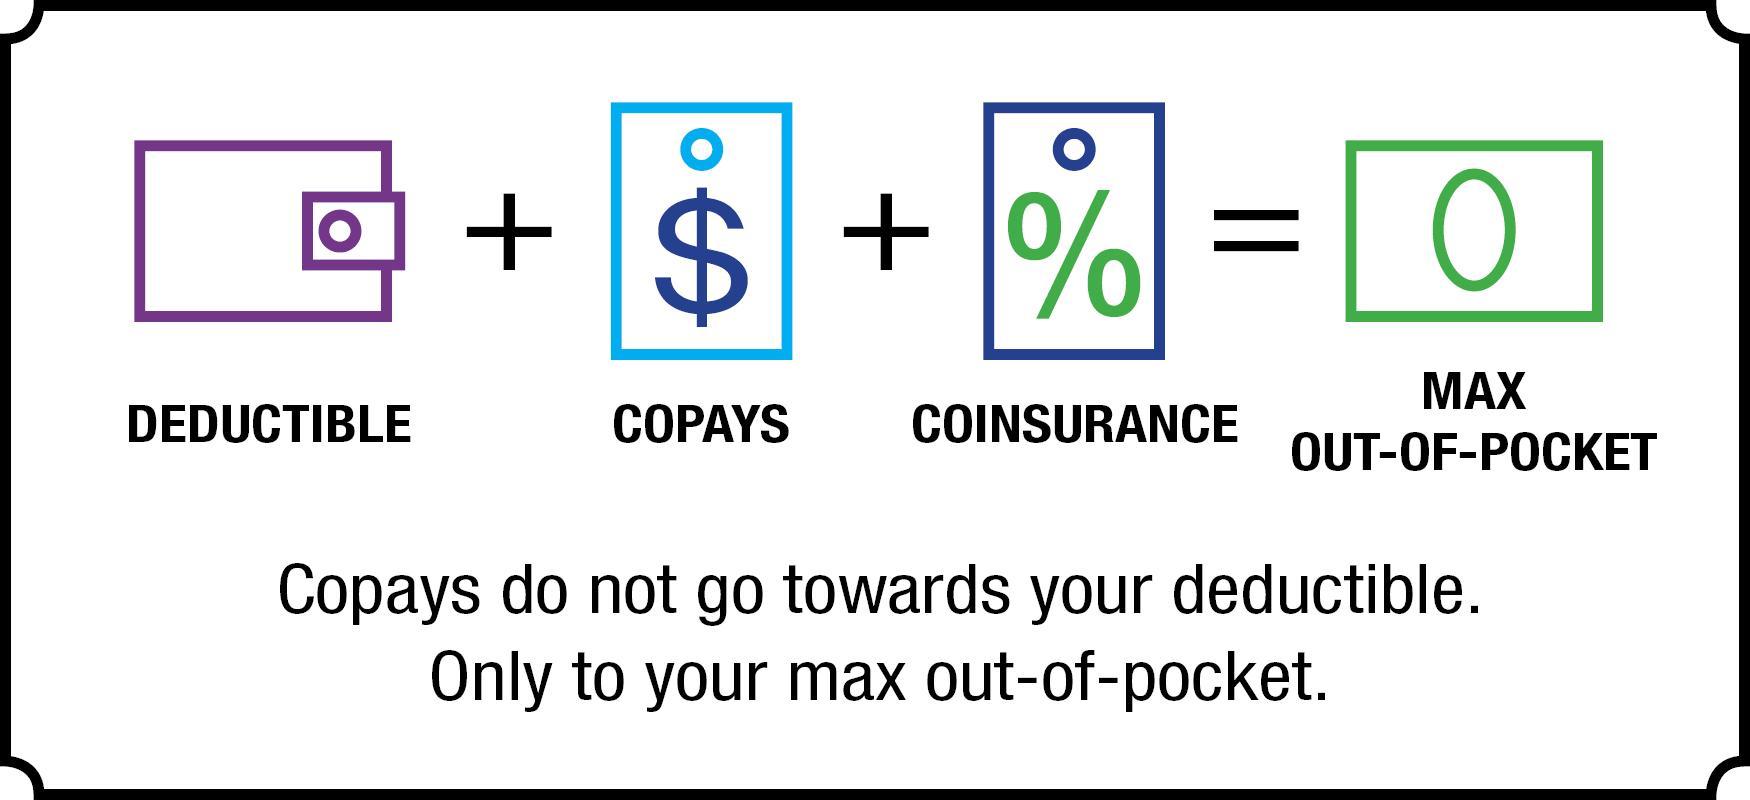 copay after deductible meaning